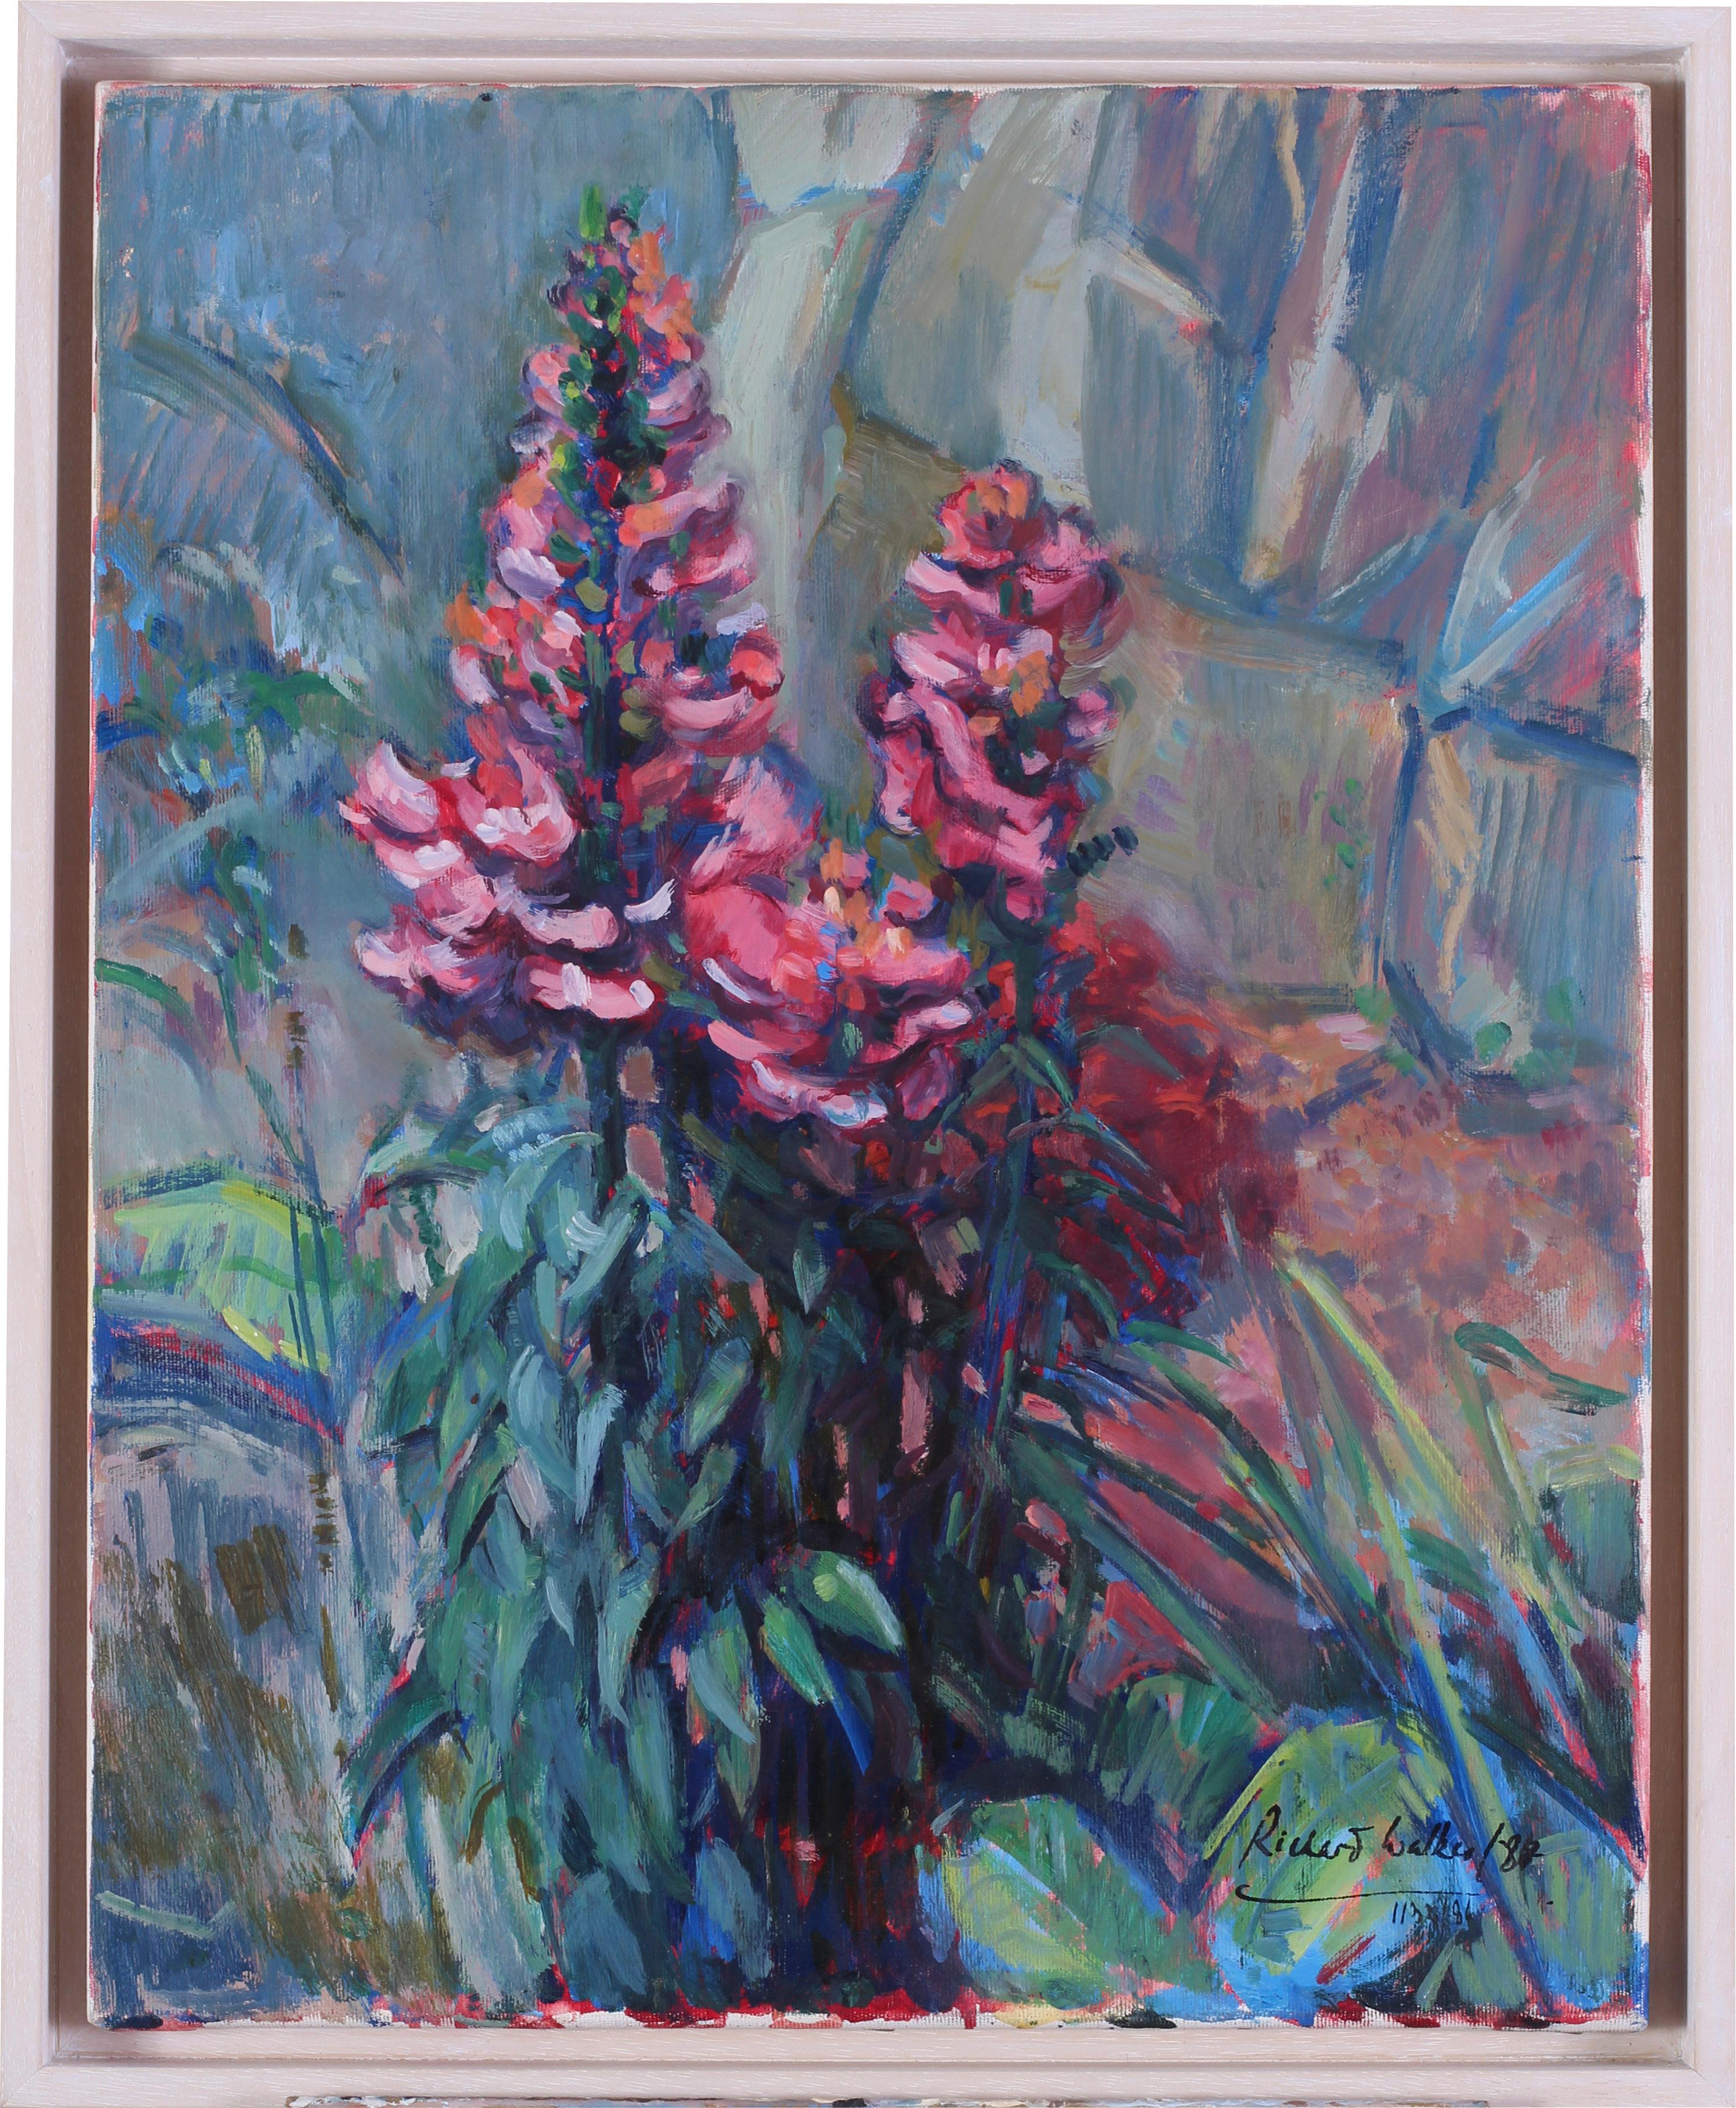 Richard Walker (British, 20th Century)
Snapdragons
Signed ‘Richard Walker / 84’ (lower right)
Oil on canvas
20 x 16 in. (50.8 x 40.8 cm.)
